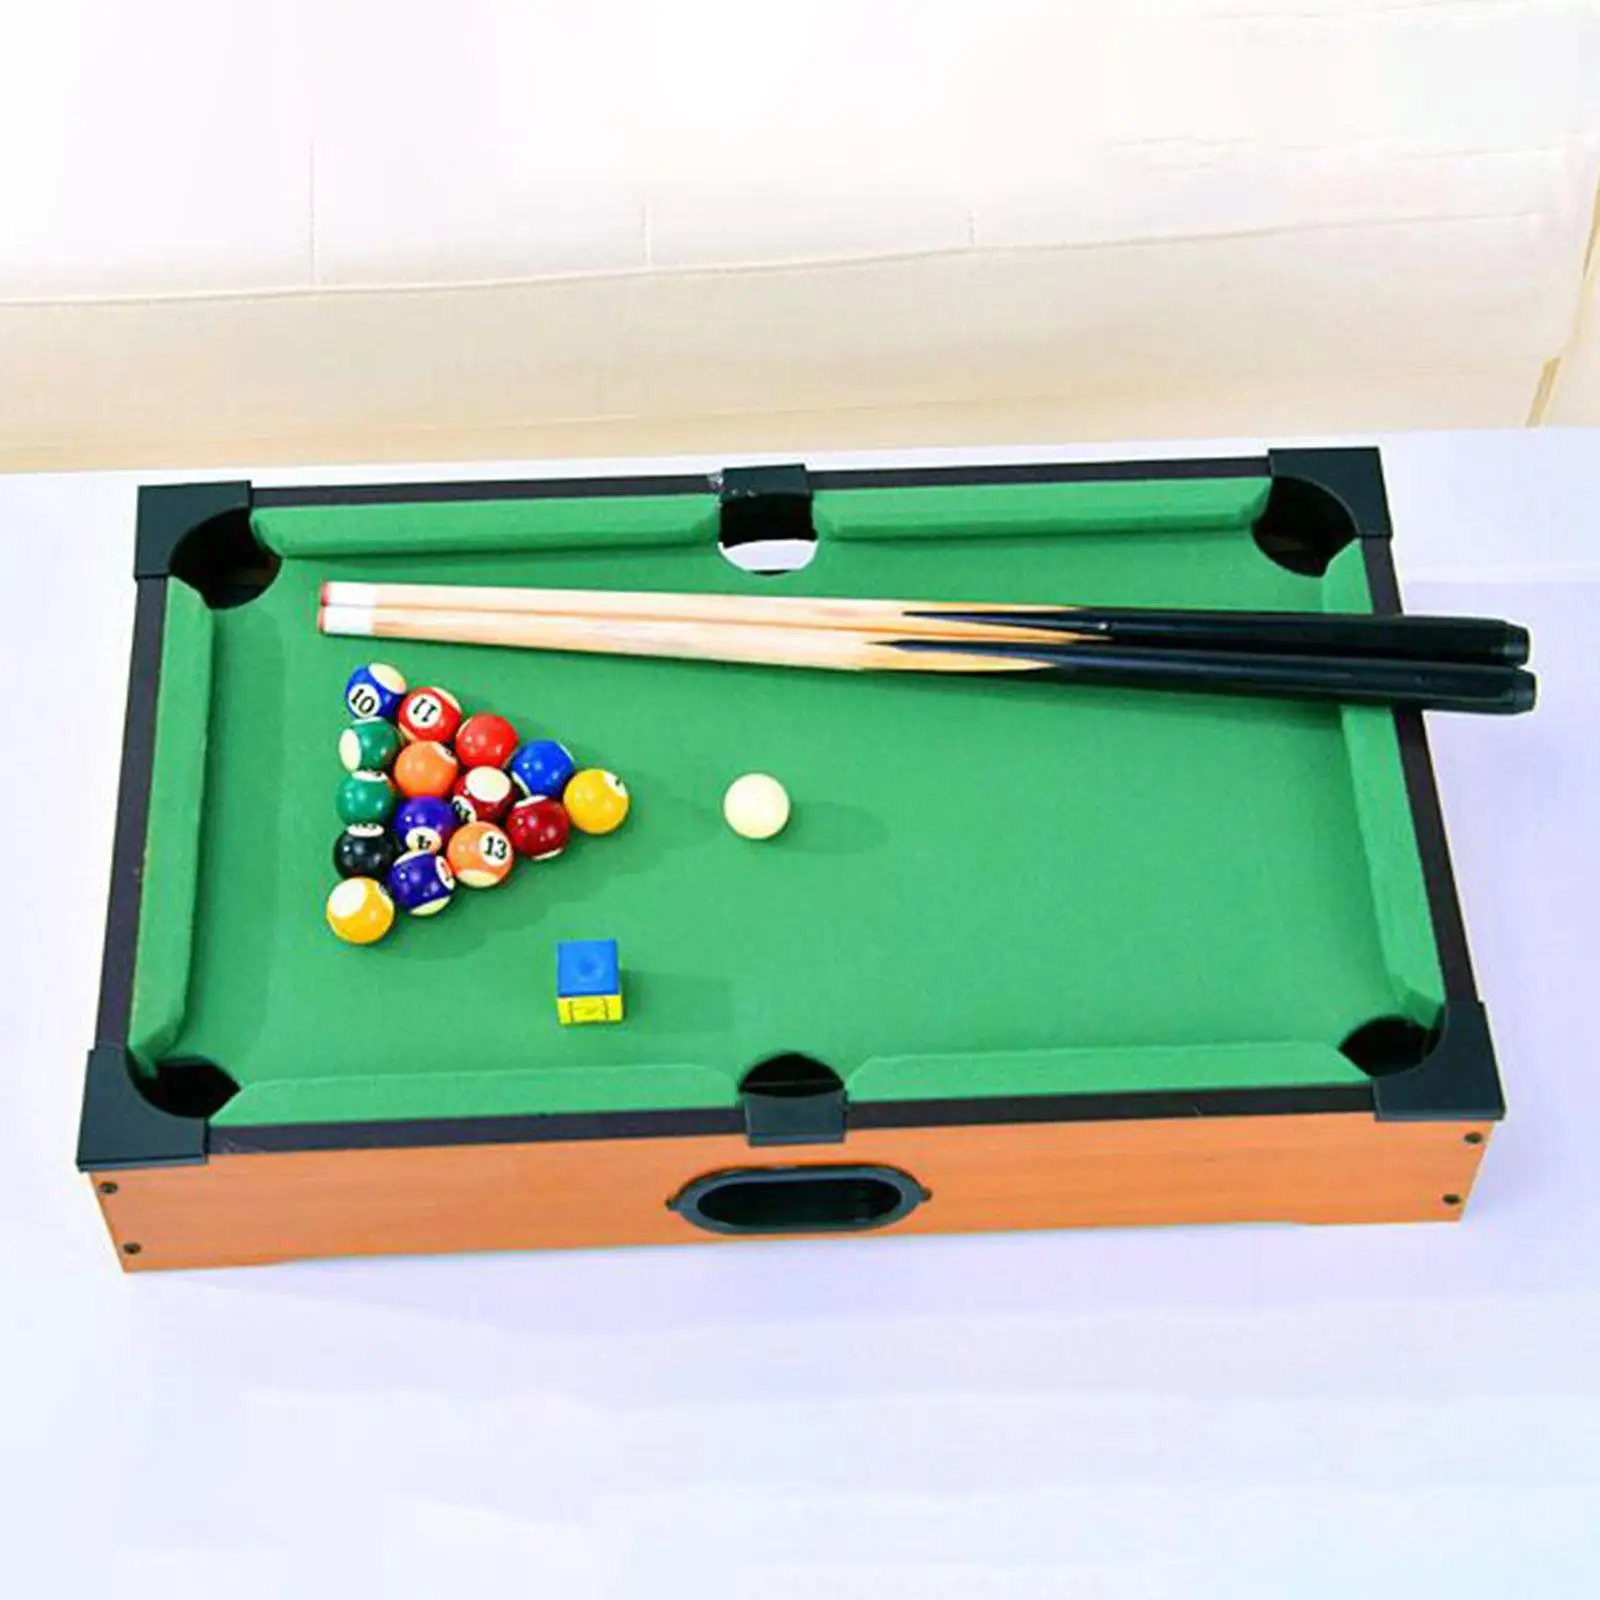 Mini Table Pool with Game Balls Portable Motor Skills Wooden Billiards Toy for Game Room Playhouse Desktop Travel Living Room